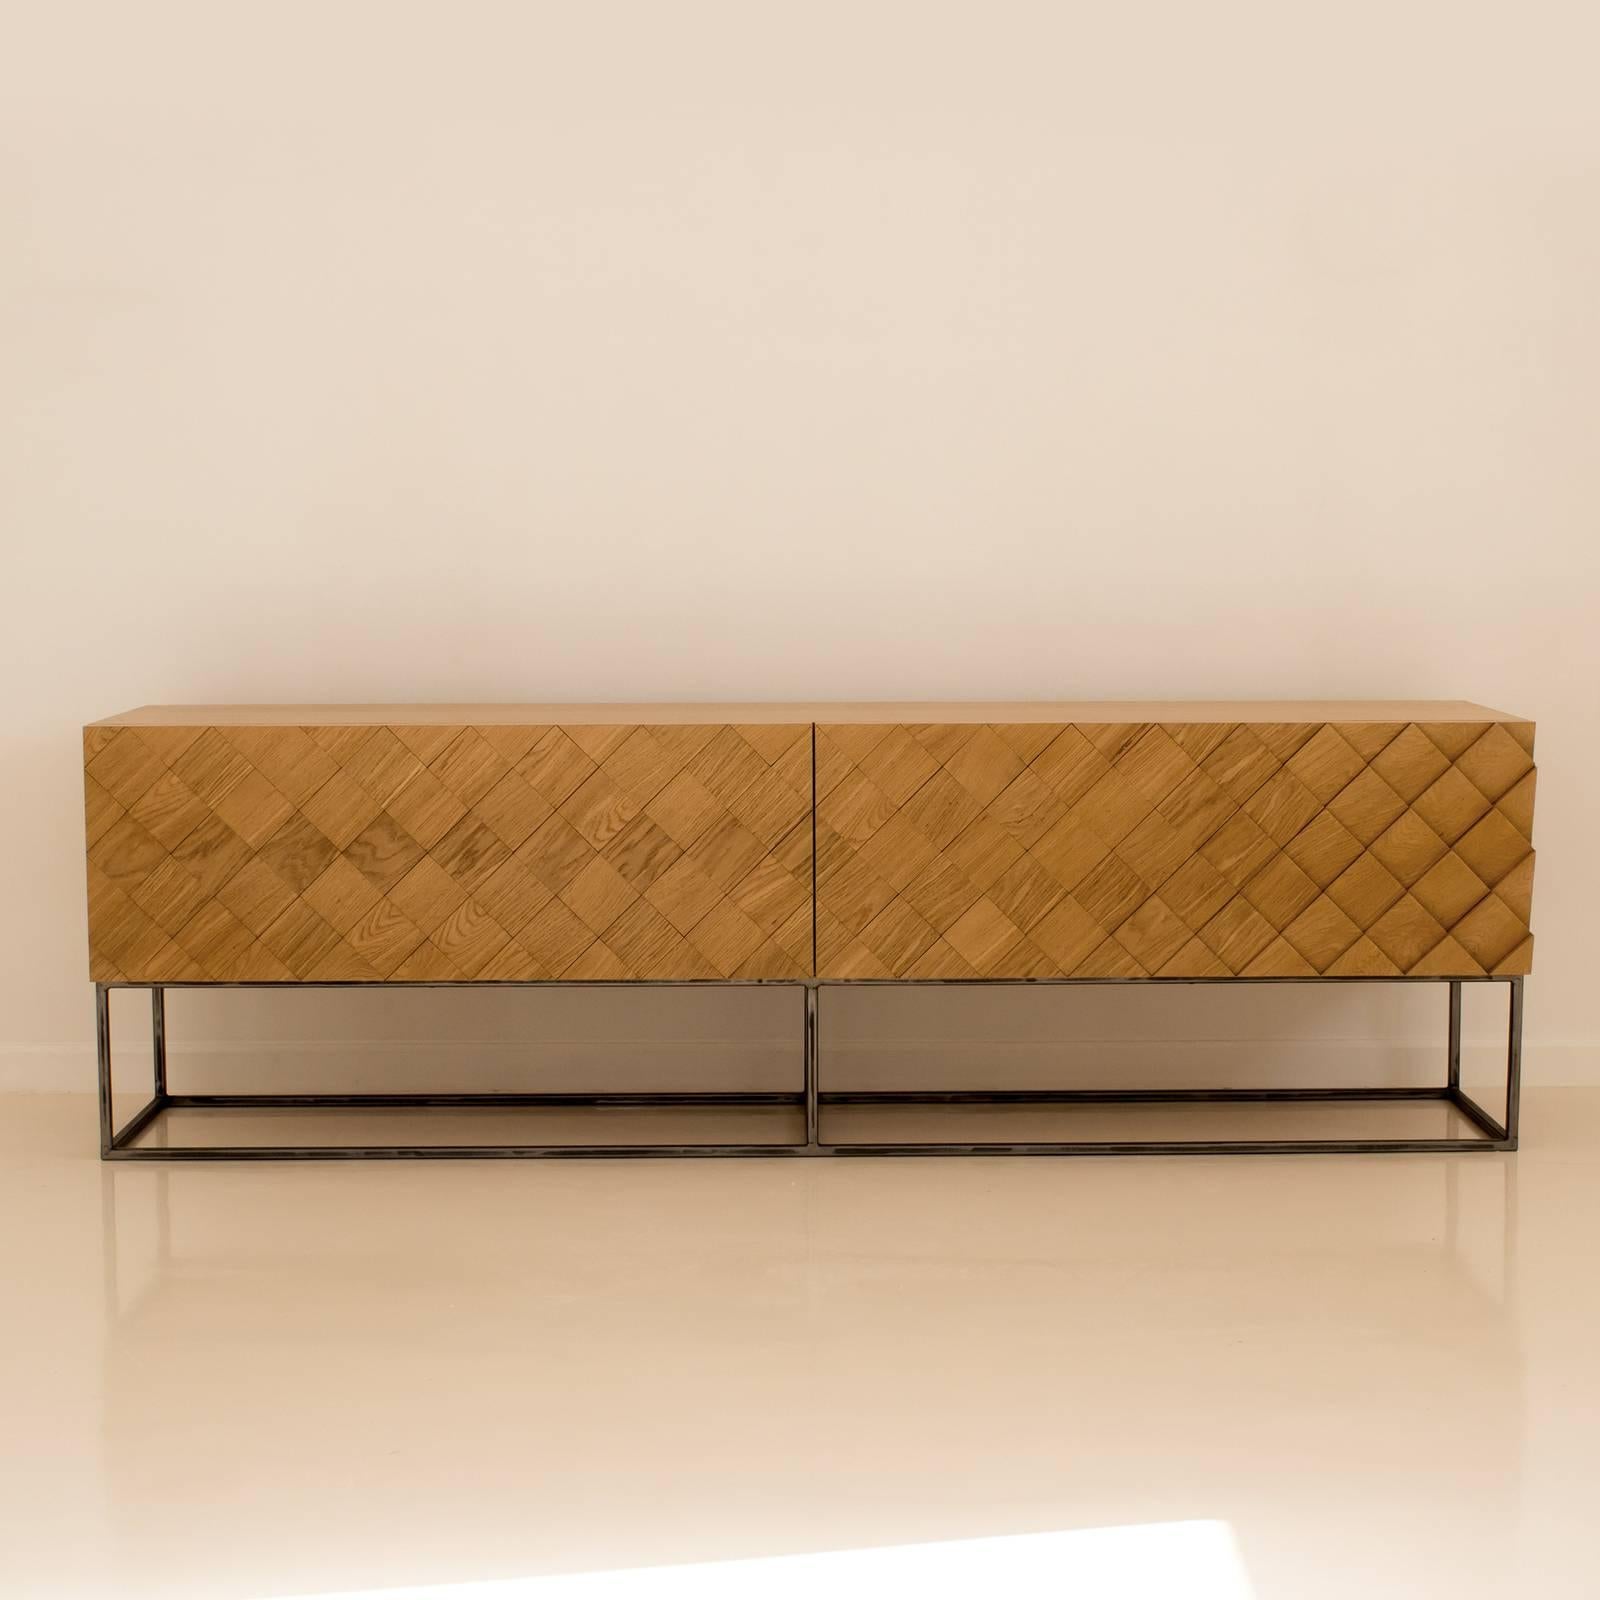 The linear and simple design of this sophisticated sideboard is complemented by the captivating, masterfully handcrafted pattern on the front panels. Composed of 122 pieces of wood, each piece is individually cut, polished, and assembled by hand to